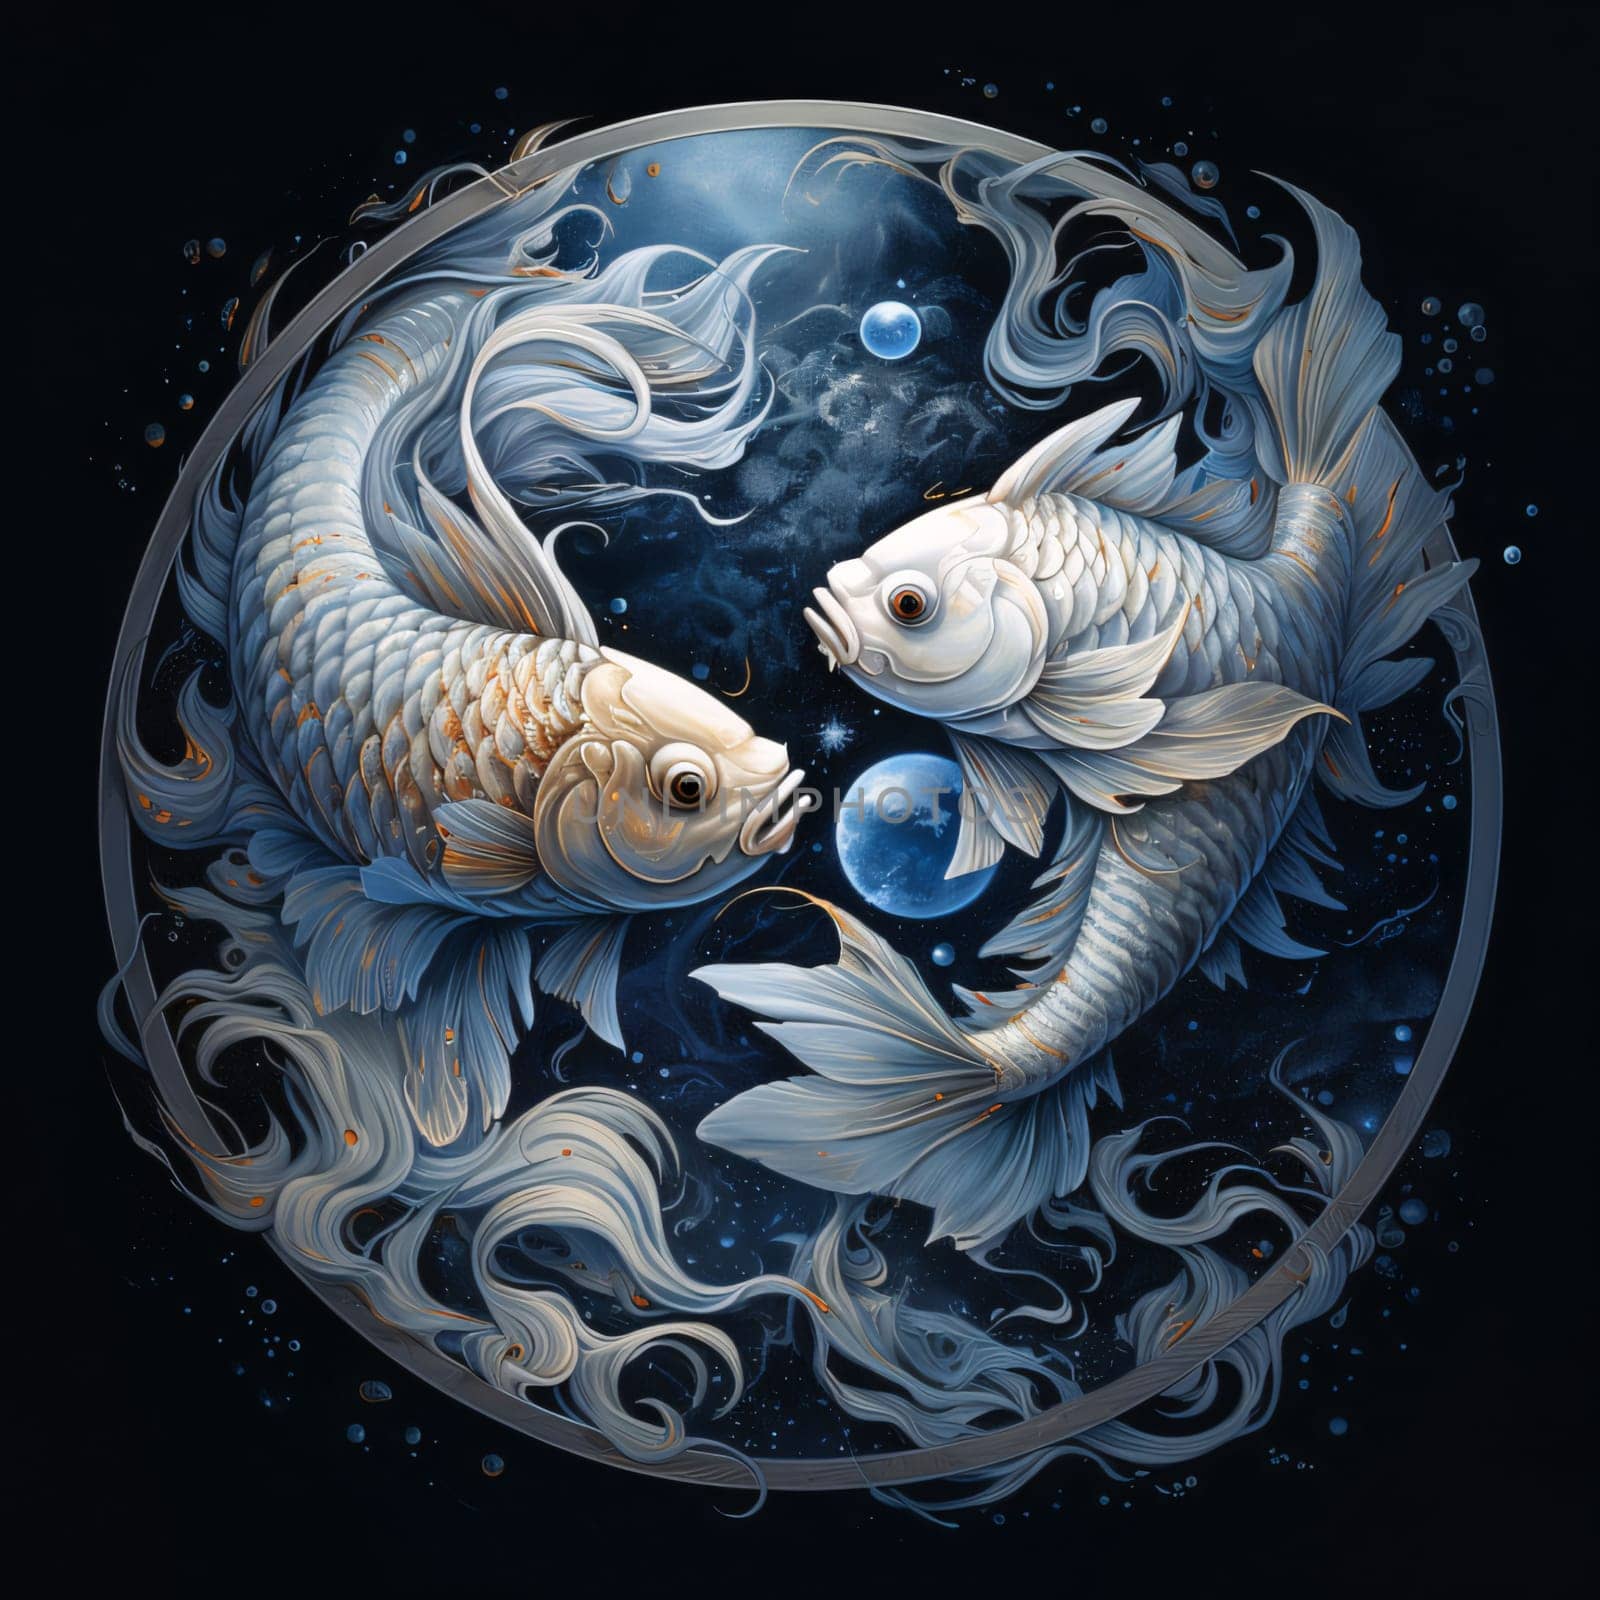 Signs of the zodiac: Beautiful goldfish swimming in the water. Illustration on a dark background.